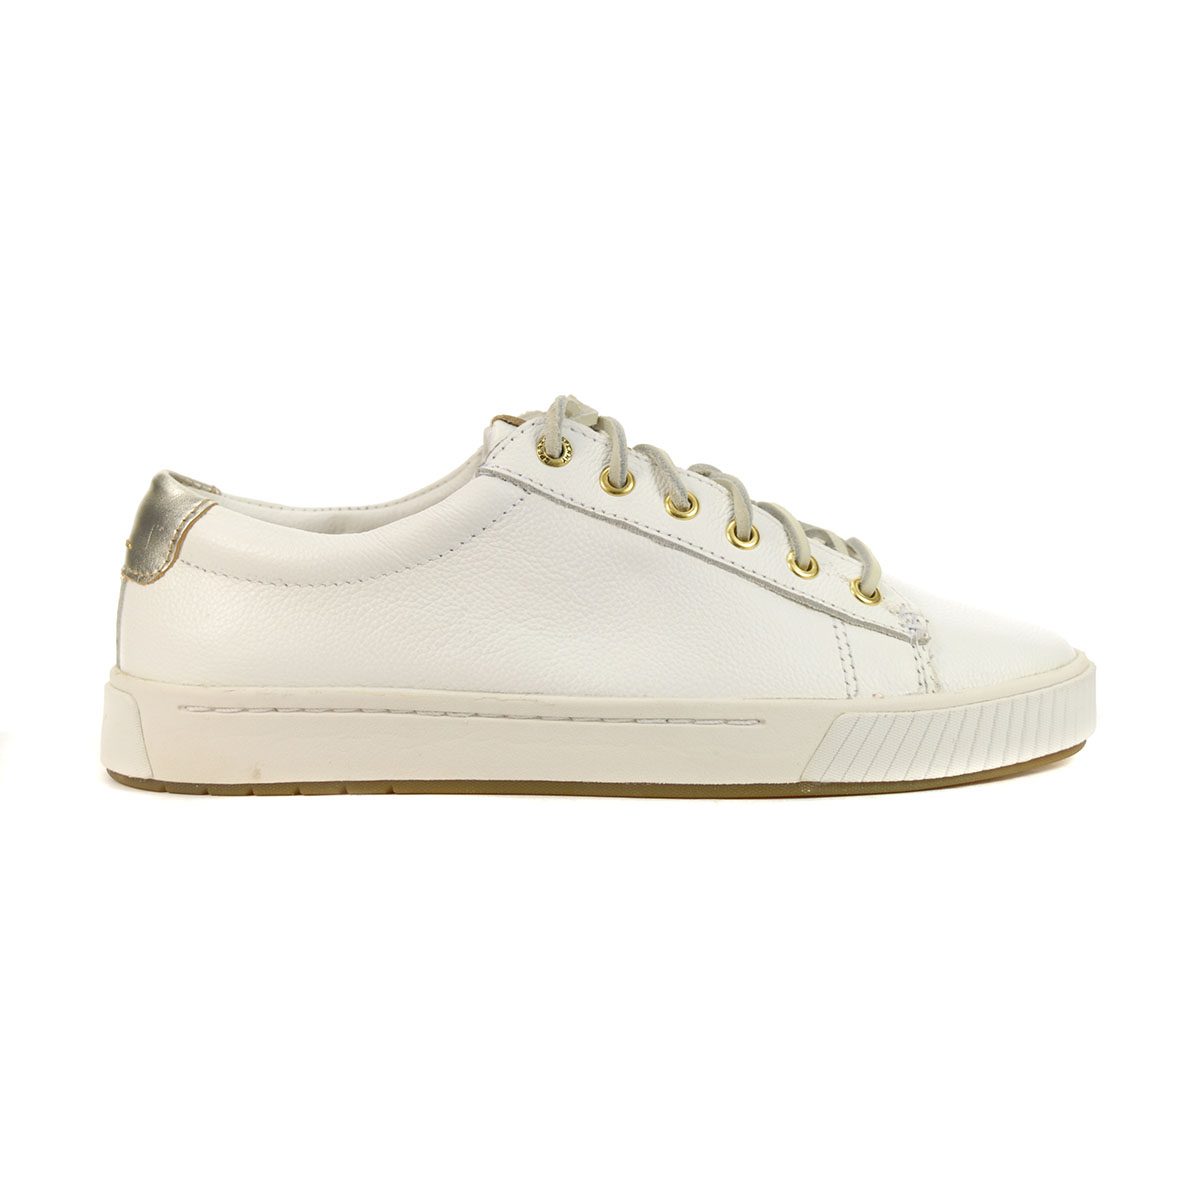 Sperry Women's Anchor Plushwave White Leather Sneakers STS84978